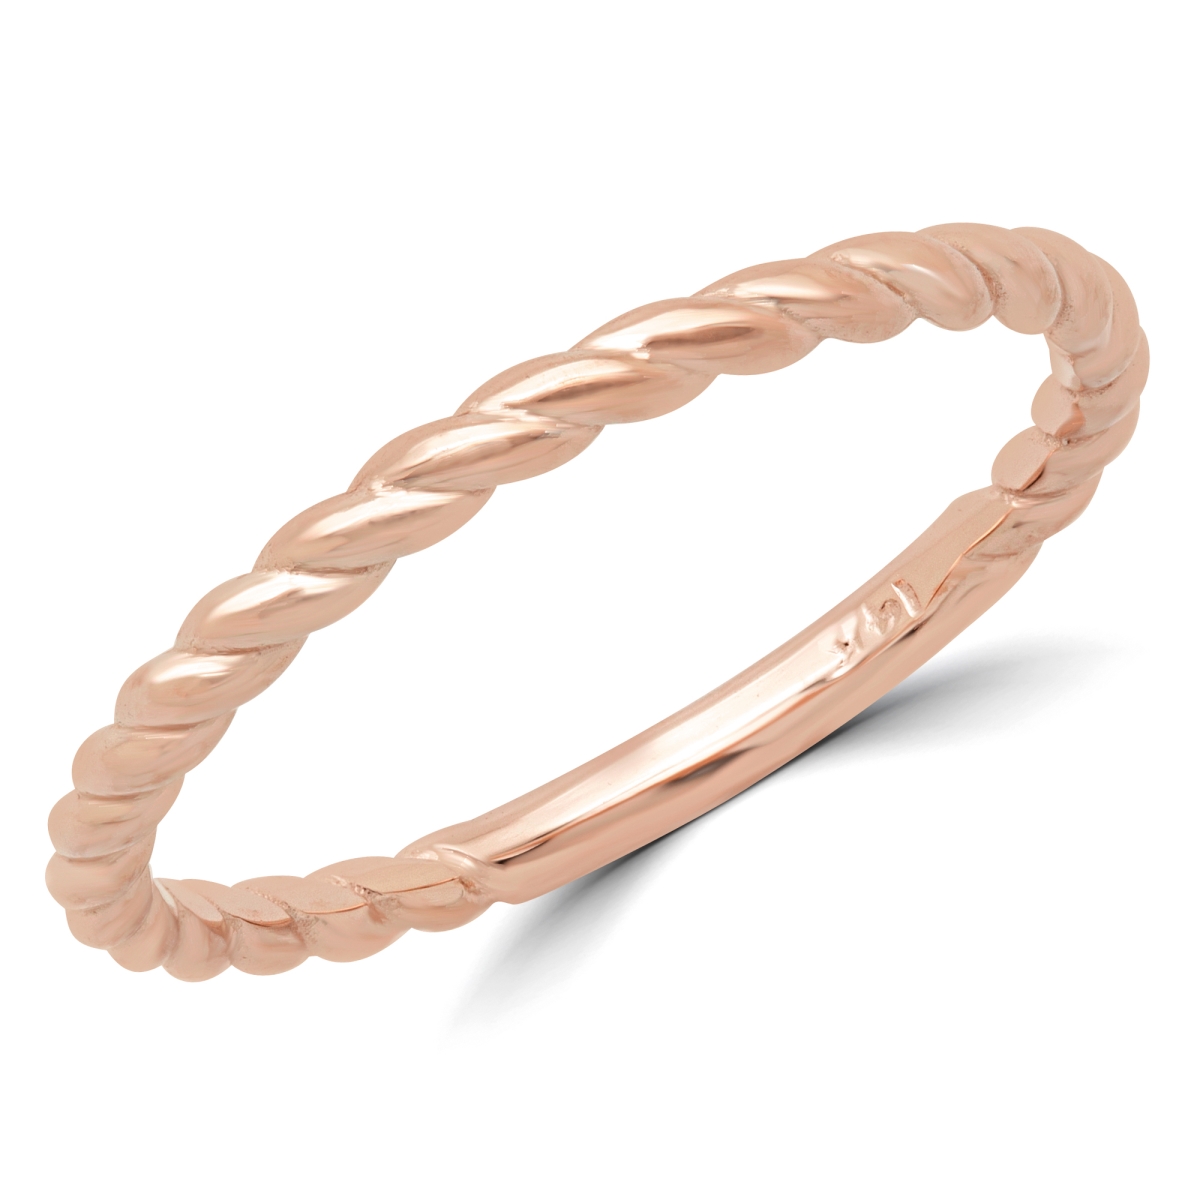 Picture of Majesty Diamonds MD180603-7.5 Braided Rope Classic Wedding Band Ring in 14K Rose Gold - Size 7.5